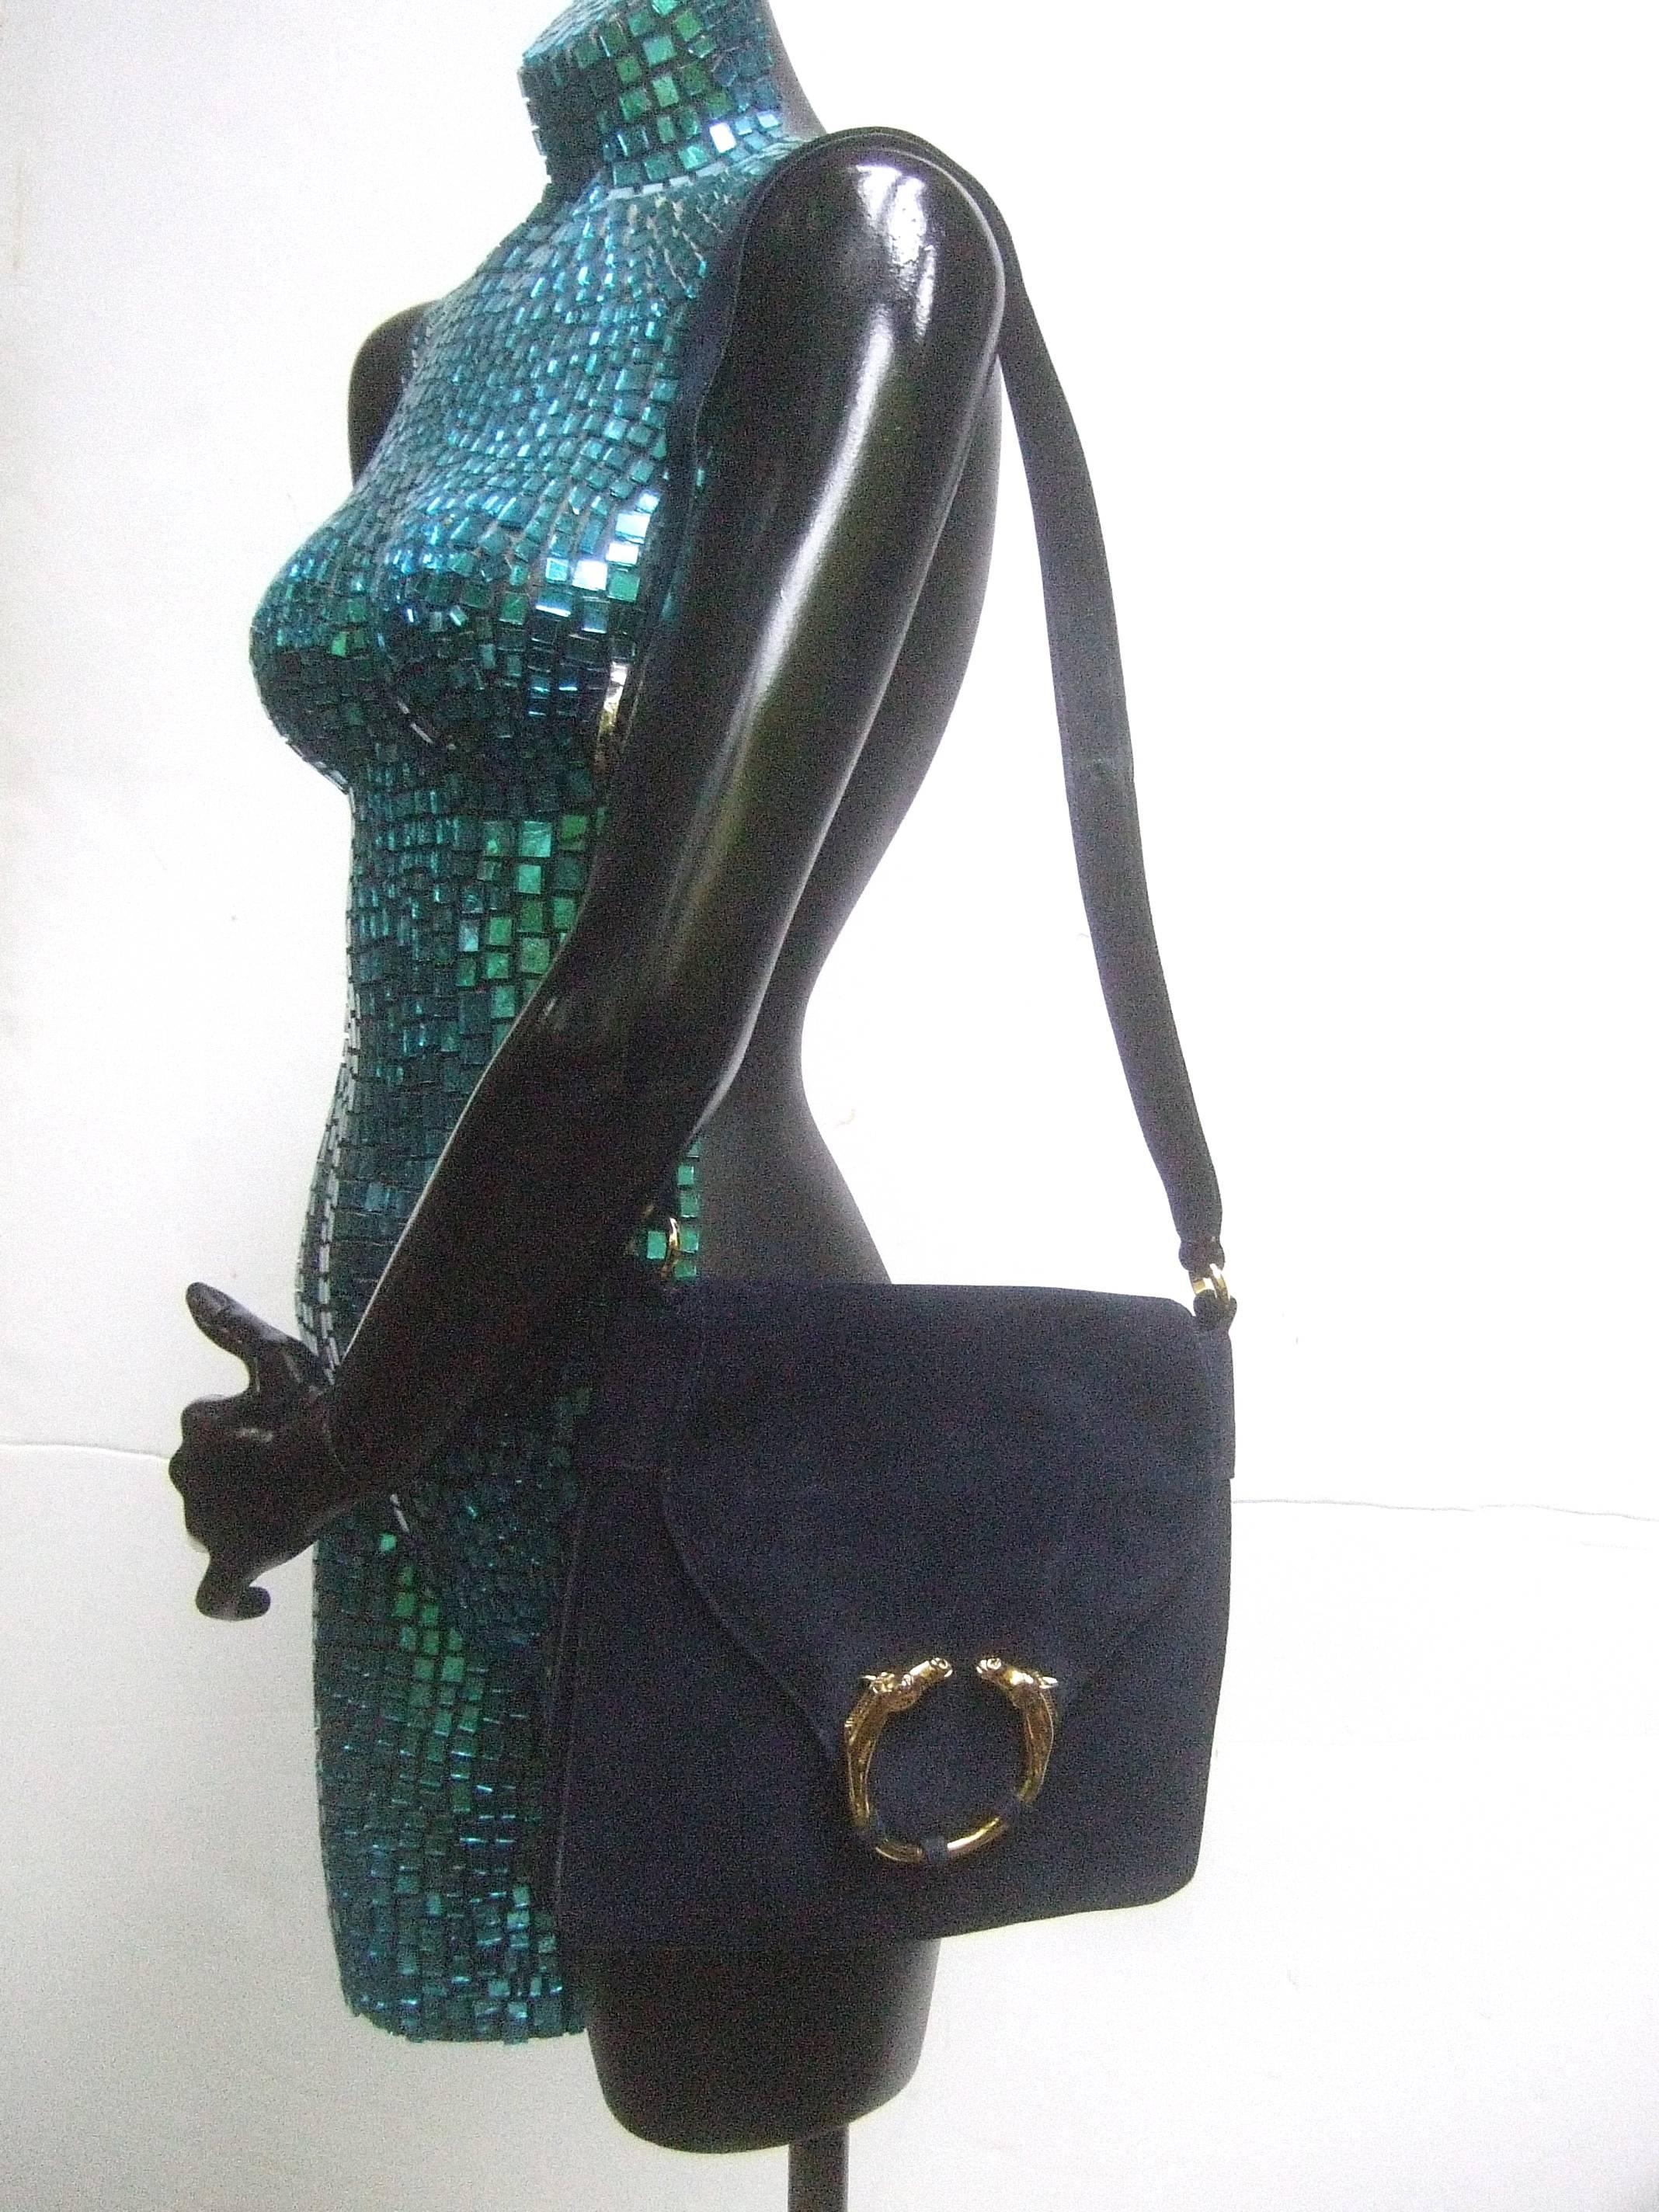 Gucci Rare Midnight Blue Equine Emblem Shoulder Bag c1970s In Good Condition For Sale In University City, MO